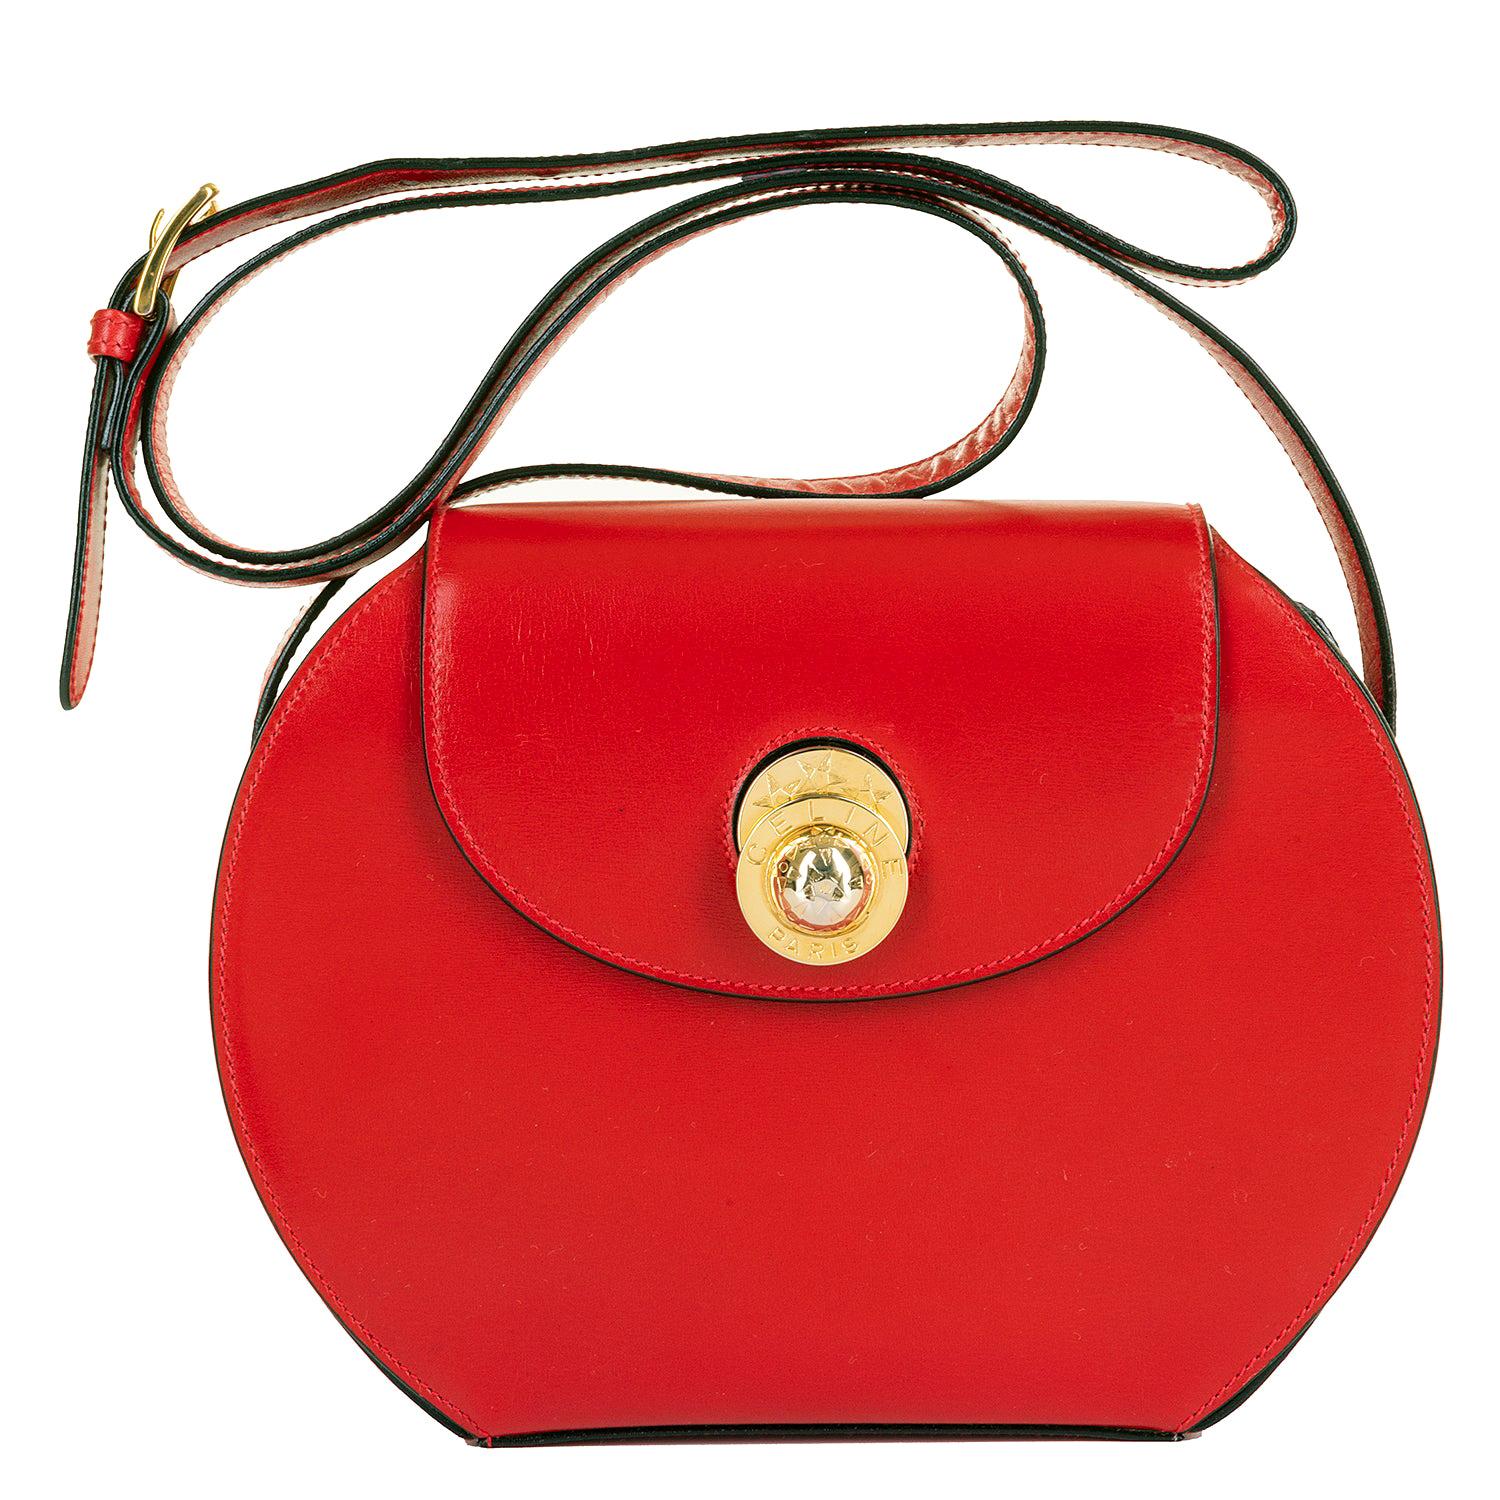 As New Celine of Paris Red Box Leather 'Star' Shoulder Bag with Gold Hardware For Sale